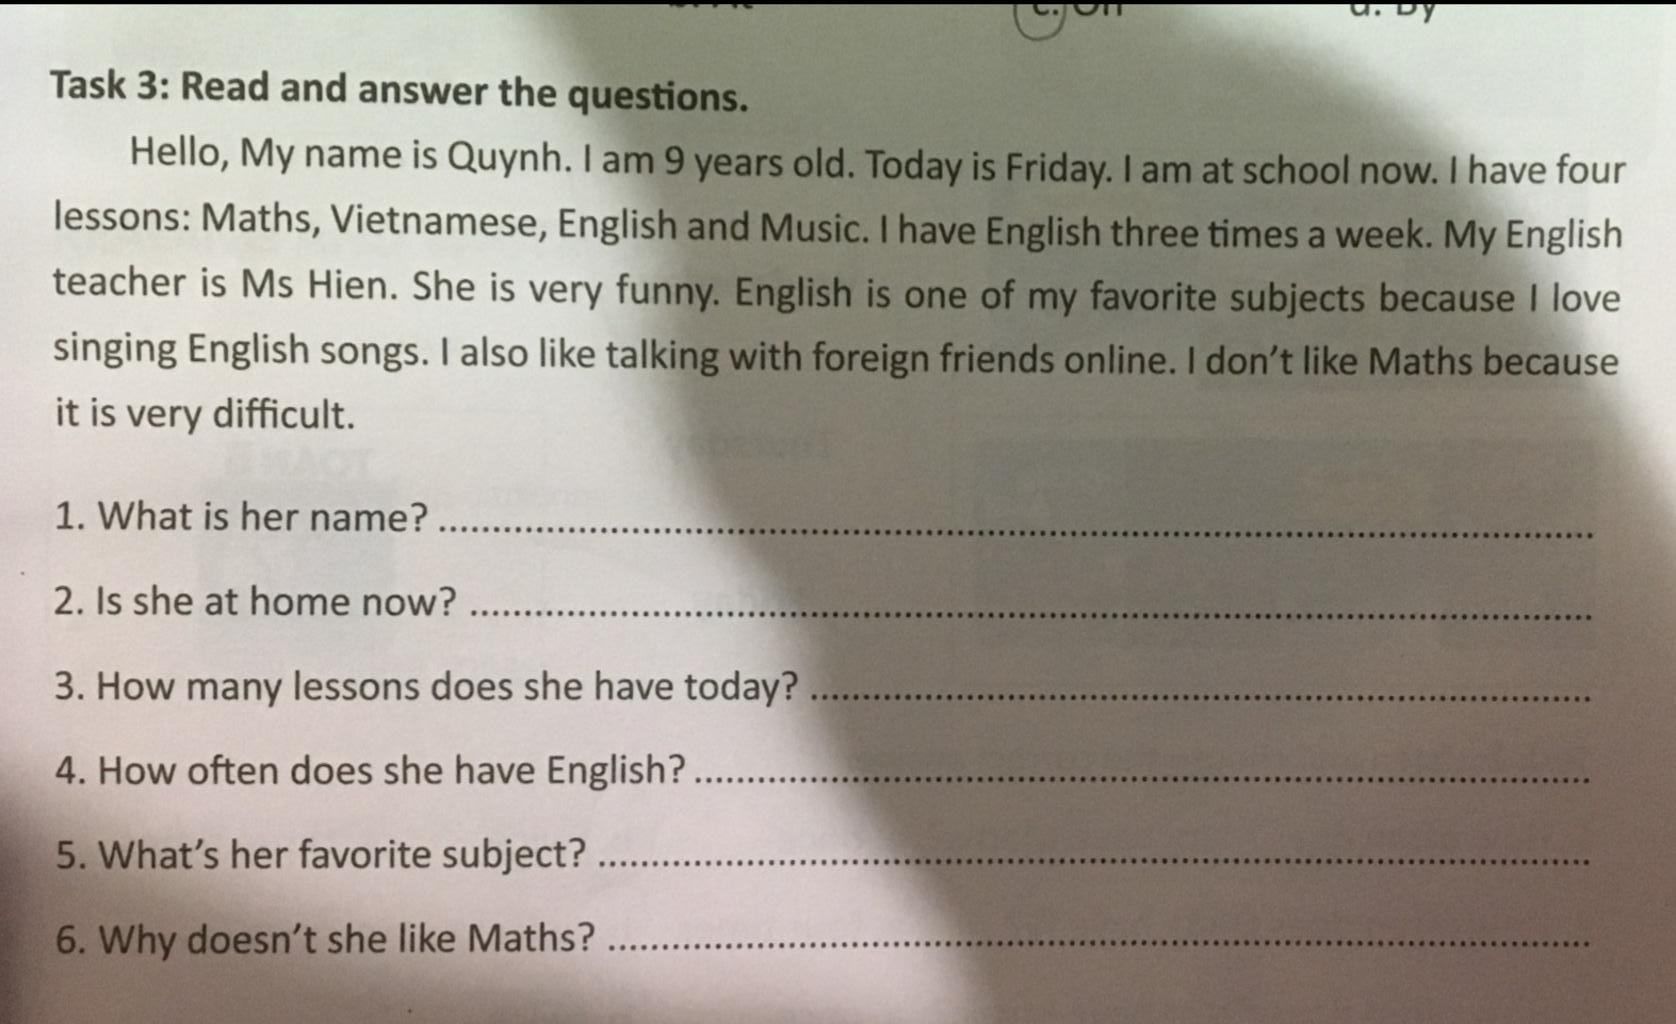 u. Dy Task 3: Read and answer the questions. Hello, My name is Quynh. I am  9 years old. Today is Friday. I am at school now. I have four lessons:  Maths, Vi